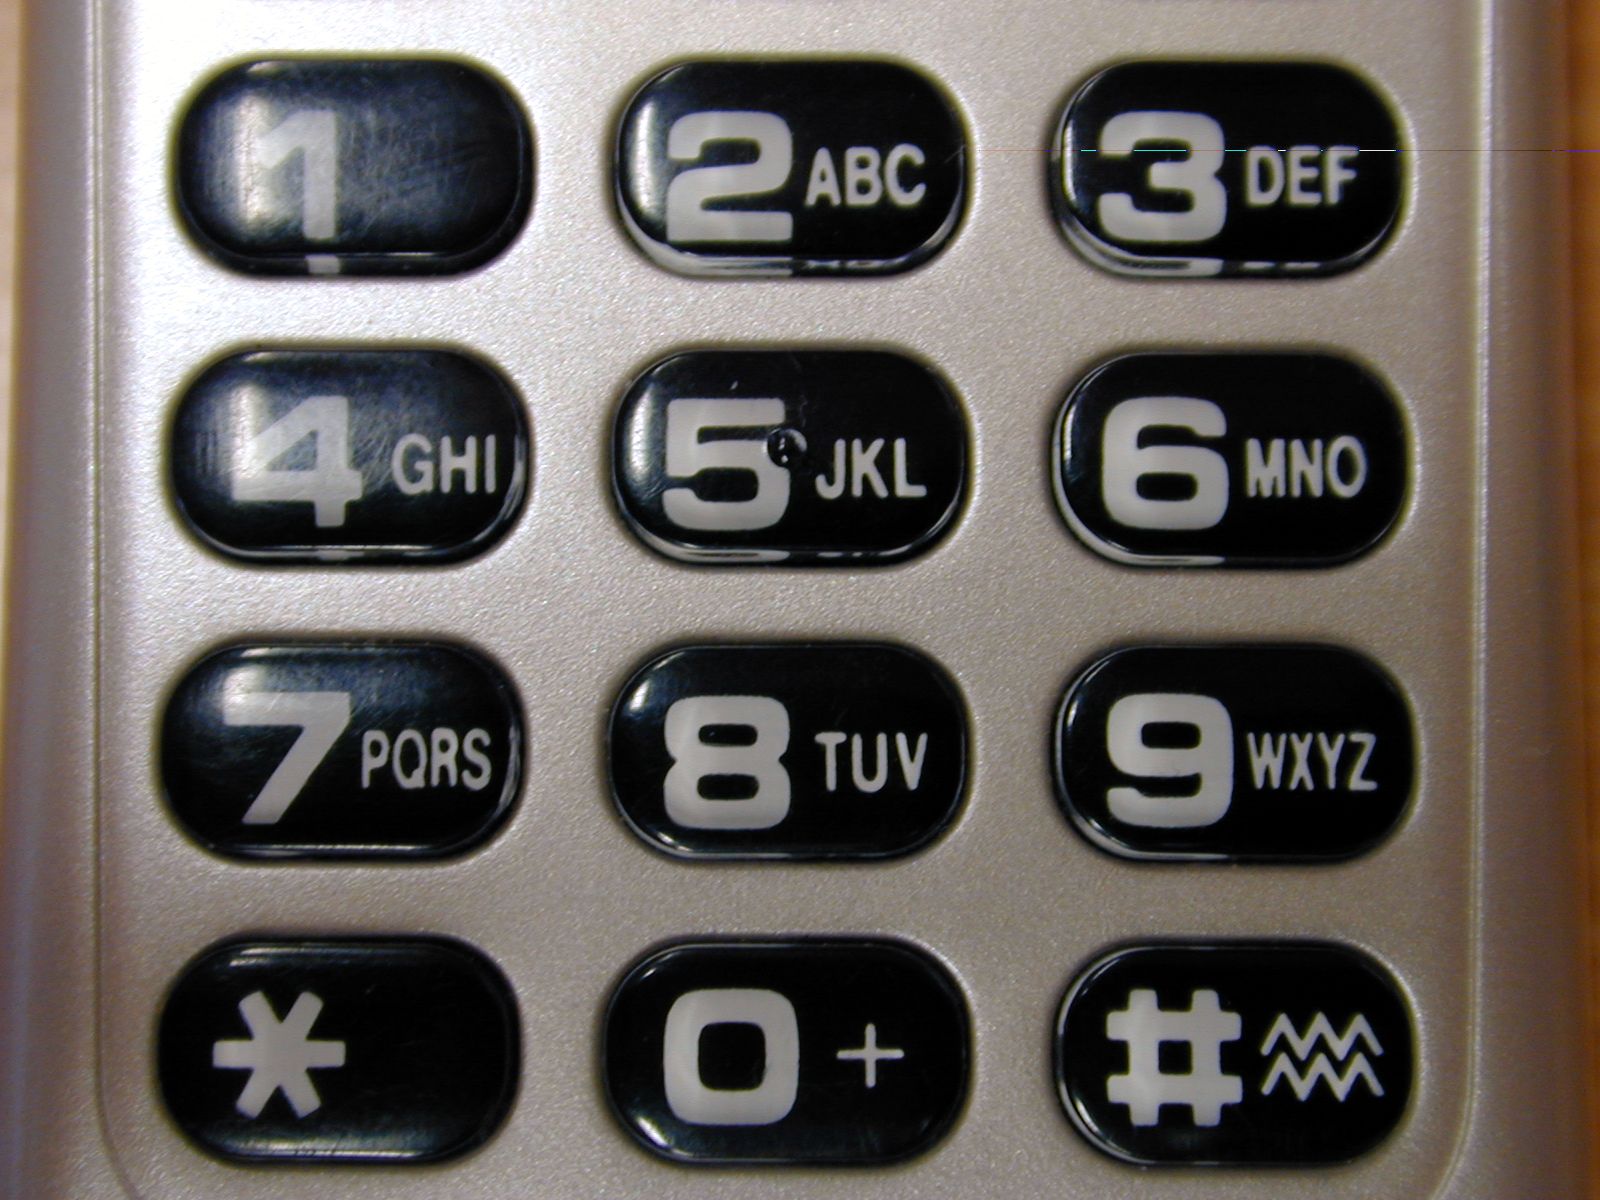 dial keyboard button buttons numbers typo typography 1 2 3 4 5 6 7 8 9 0 gsm mobile telephone